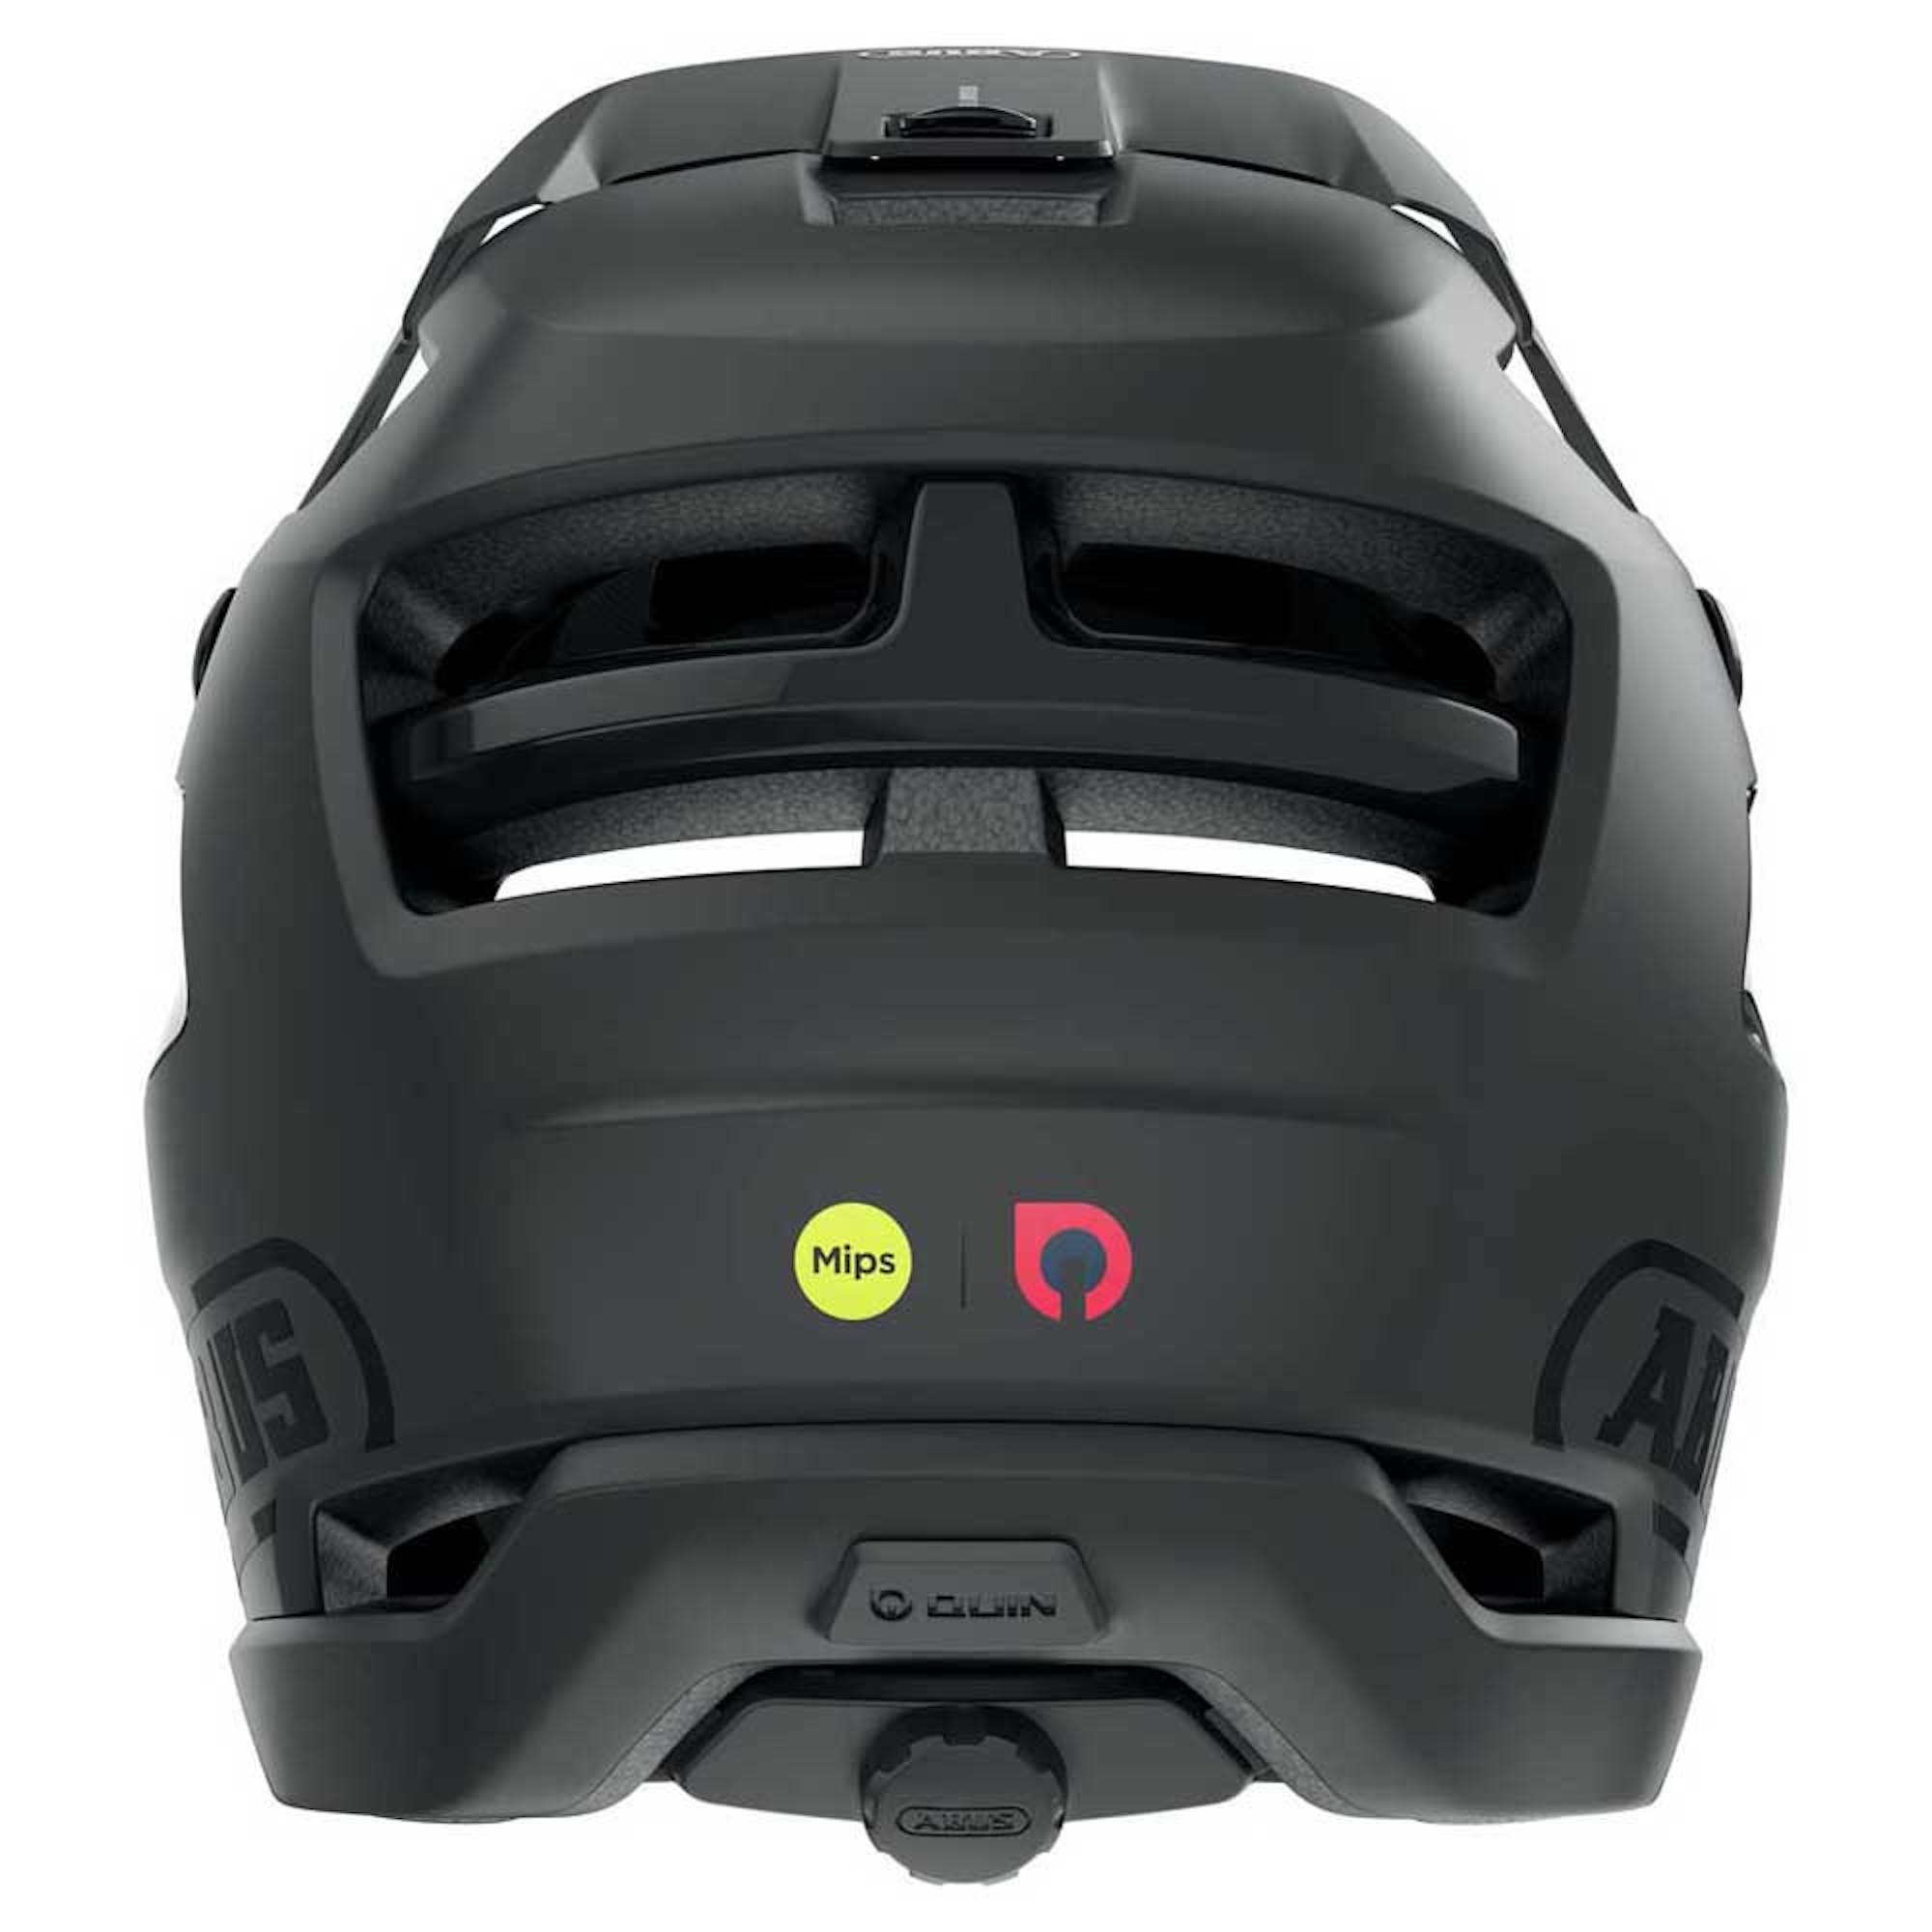 An ABUS bicycle helmet featuring technology from both Mips and Quin. Media sourced from Tradeinn.